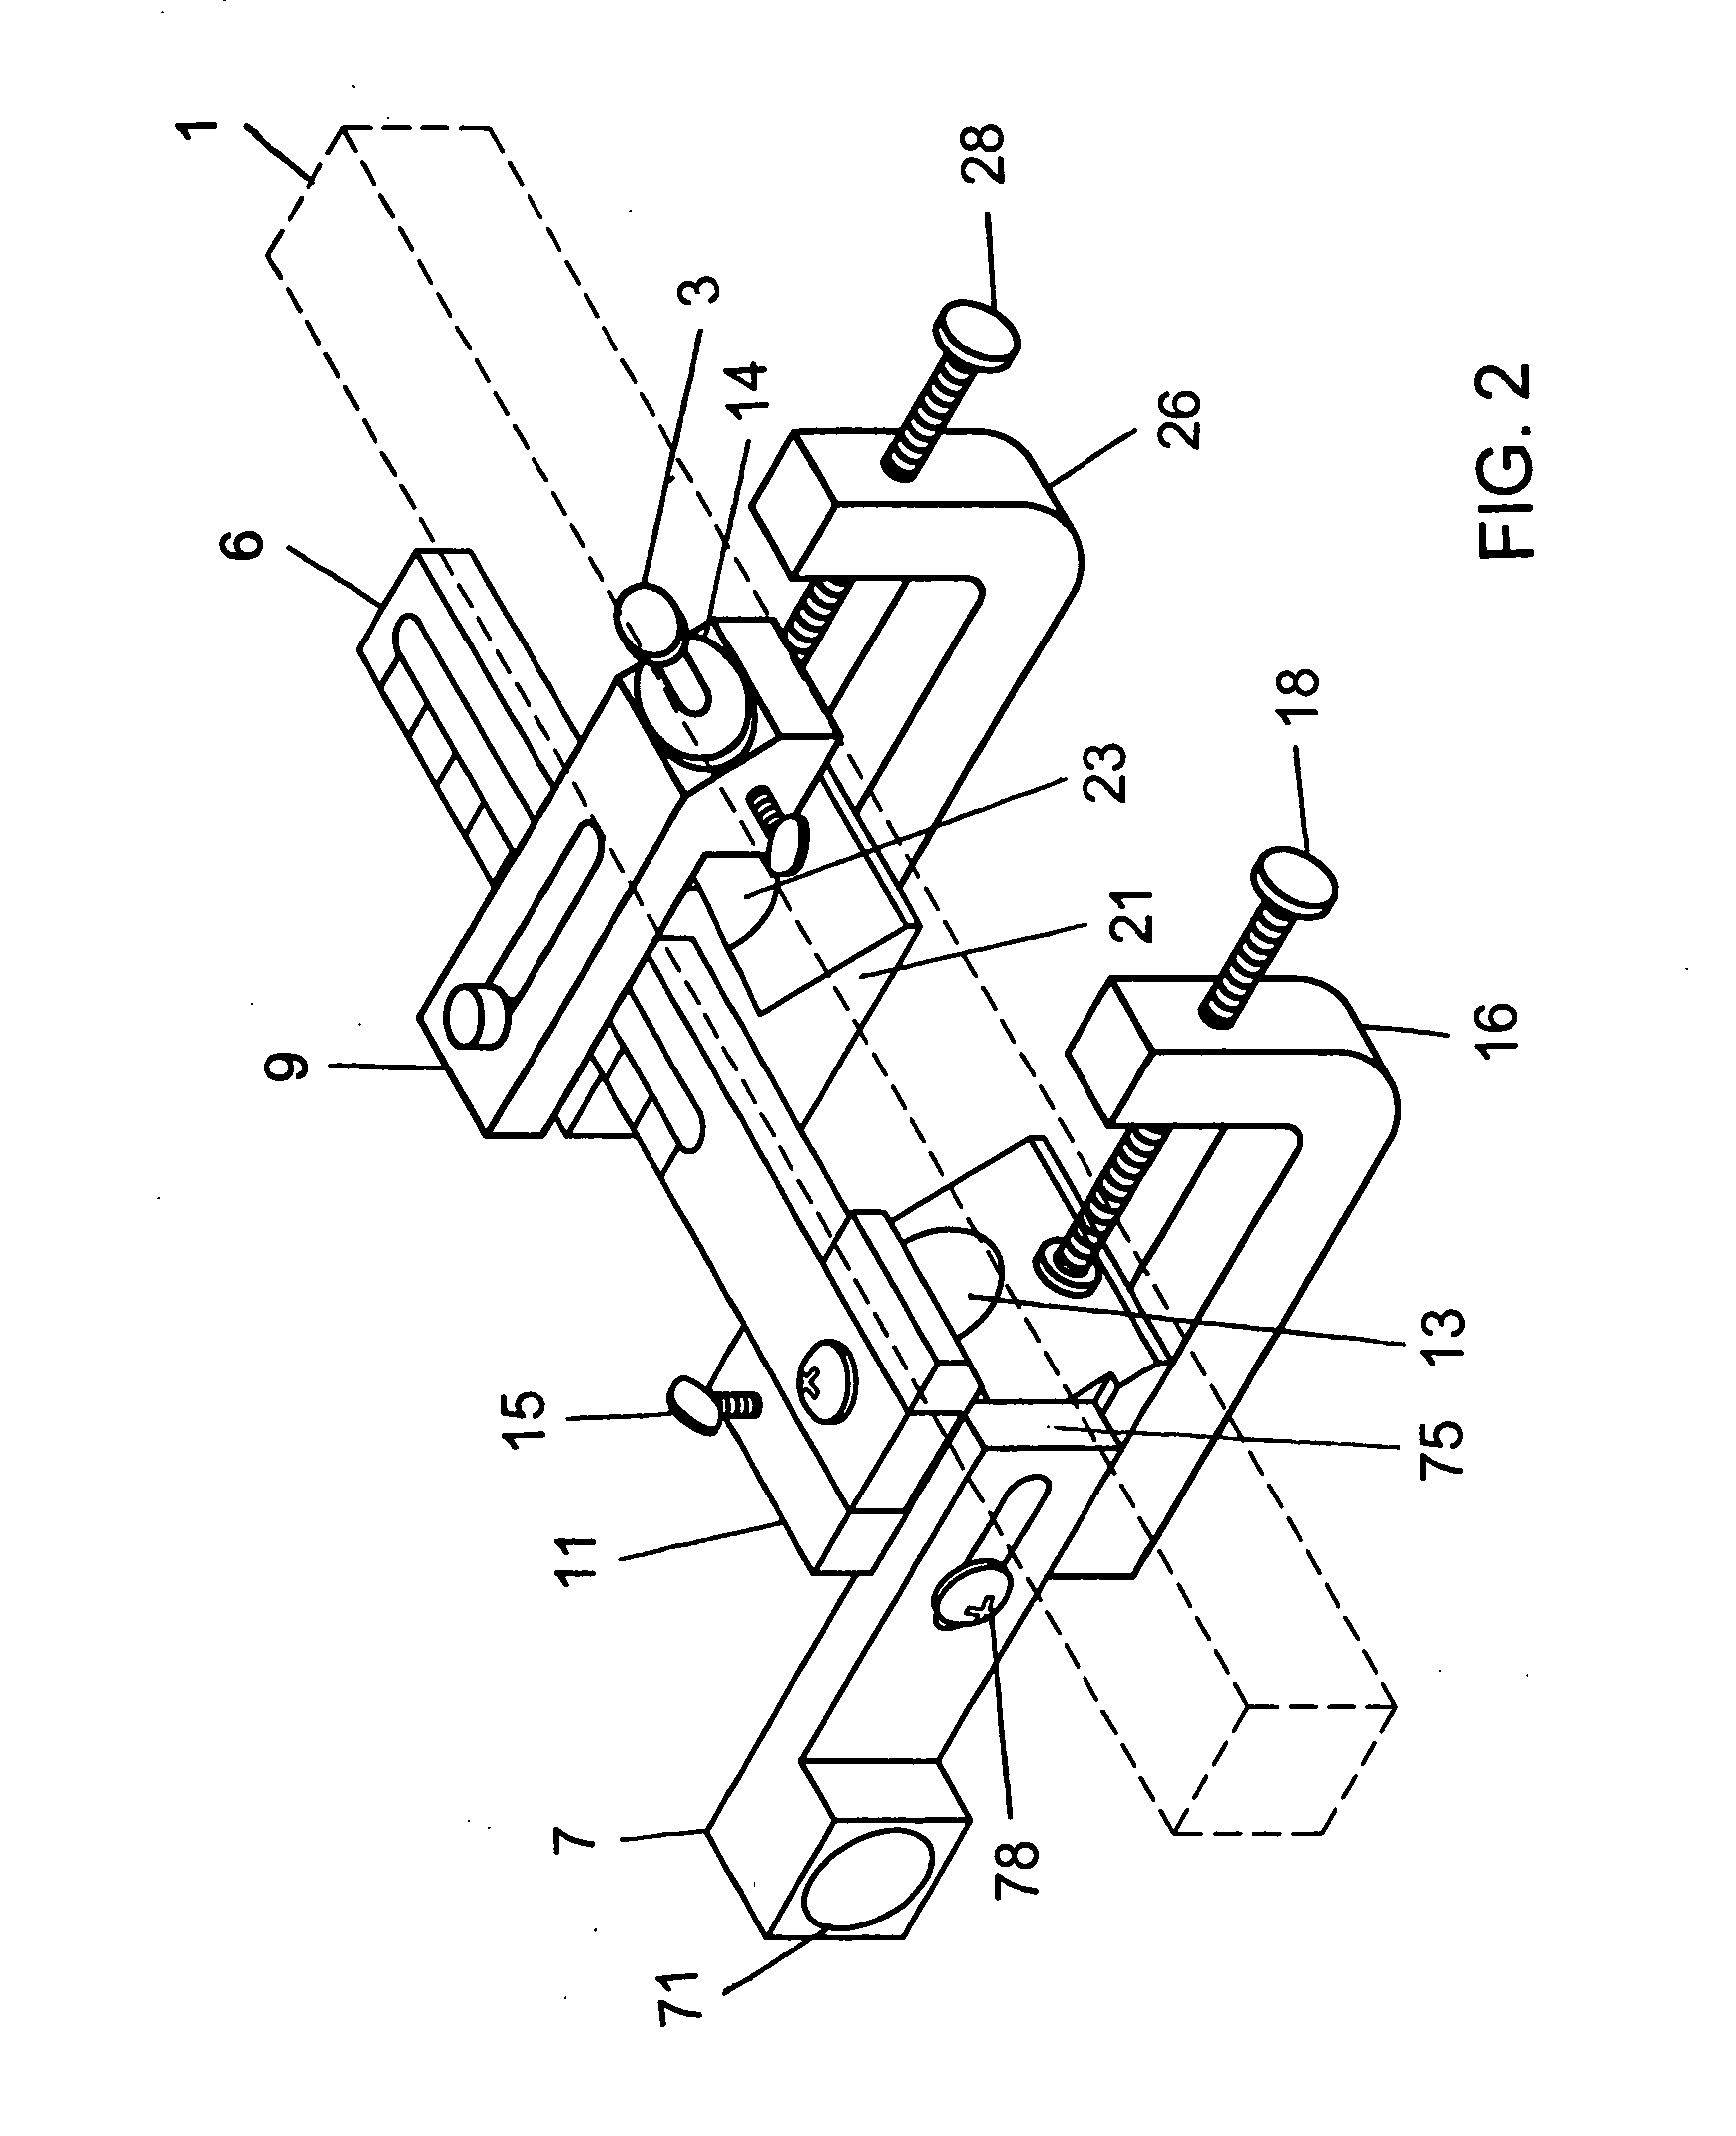 Fixturing device for drilling workpieces